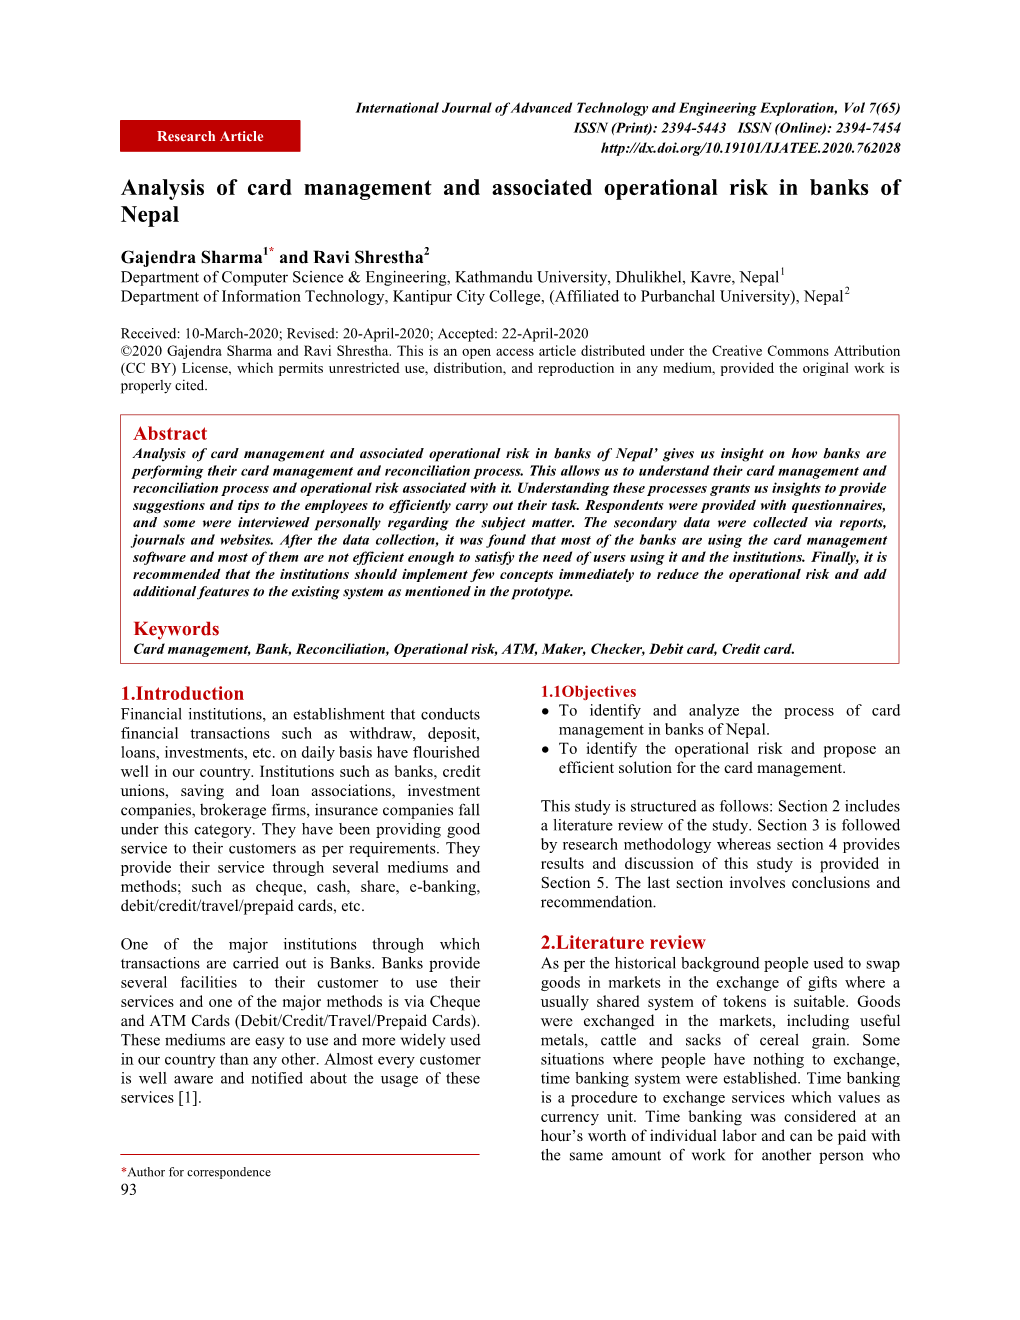 Analysis of Card Management and Associated Operational Risk in Banks of Nepal